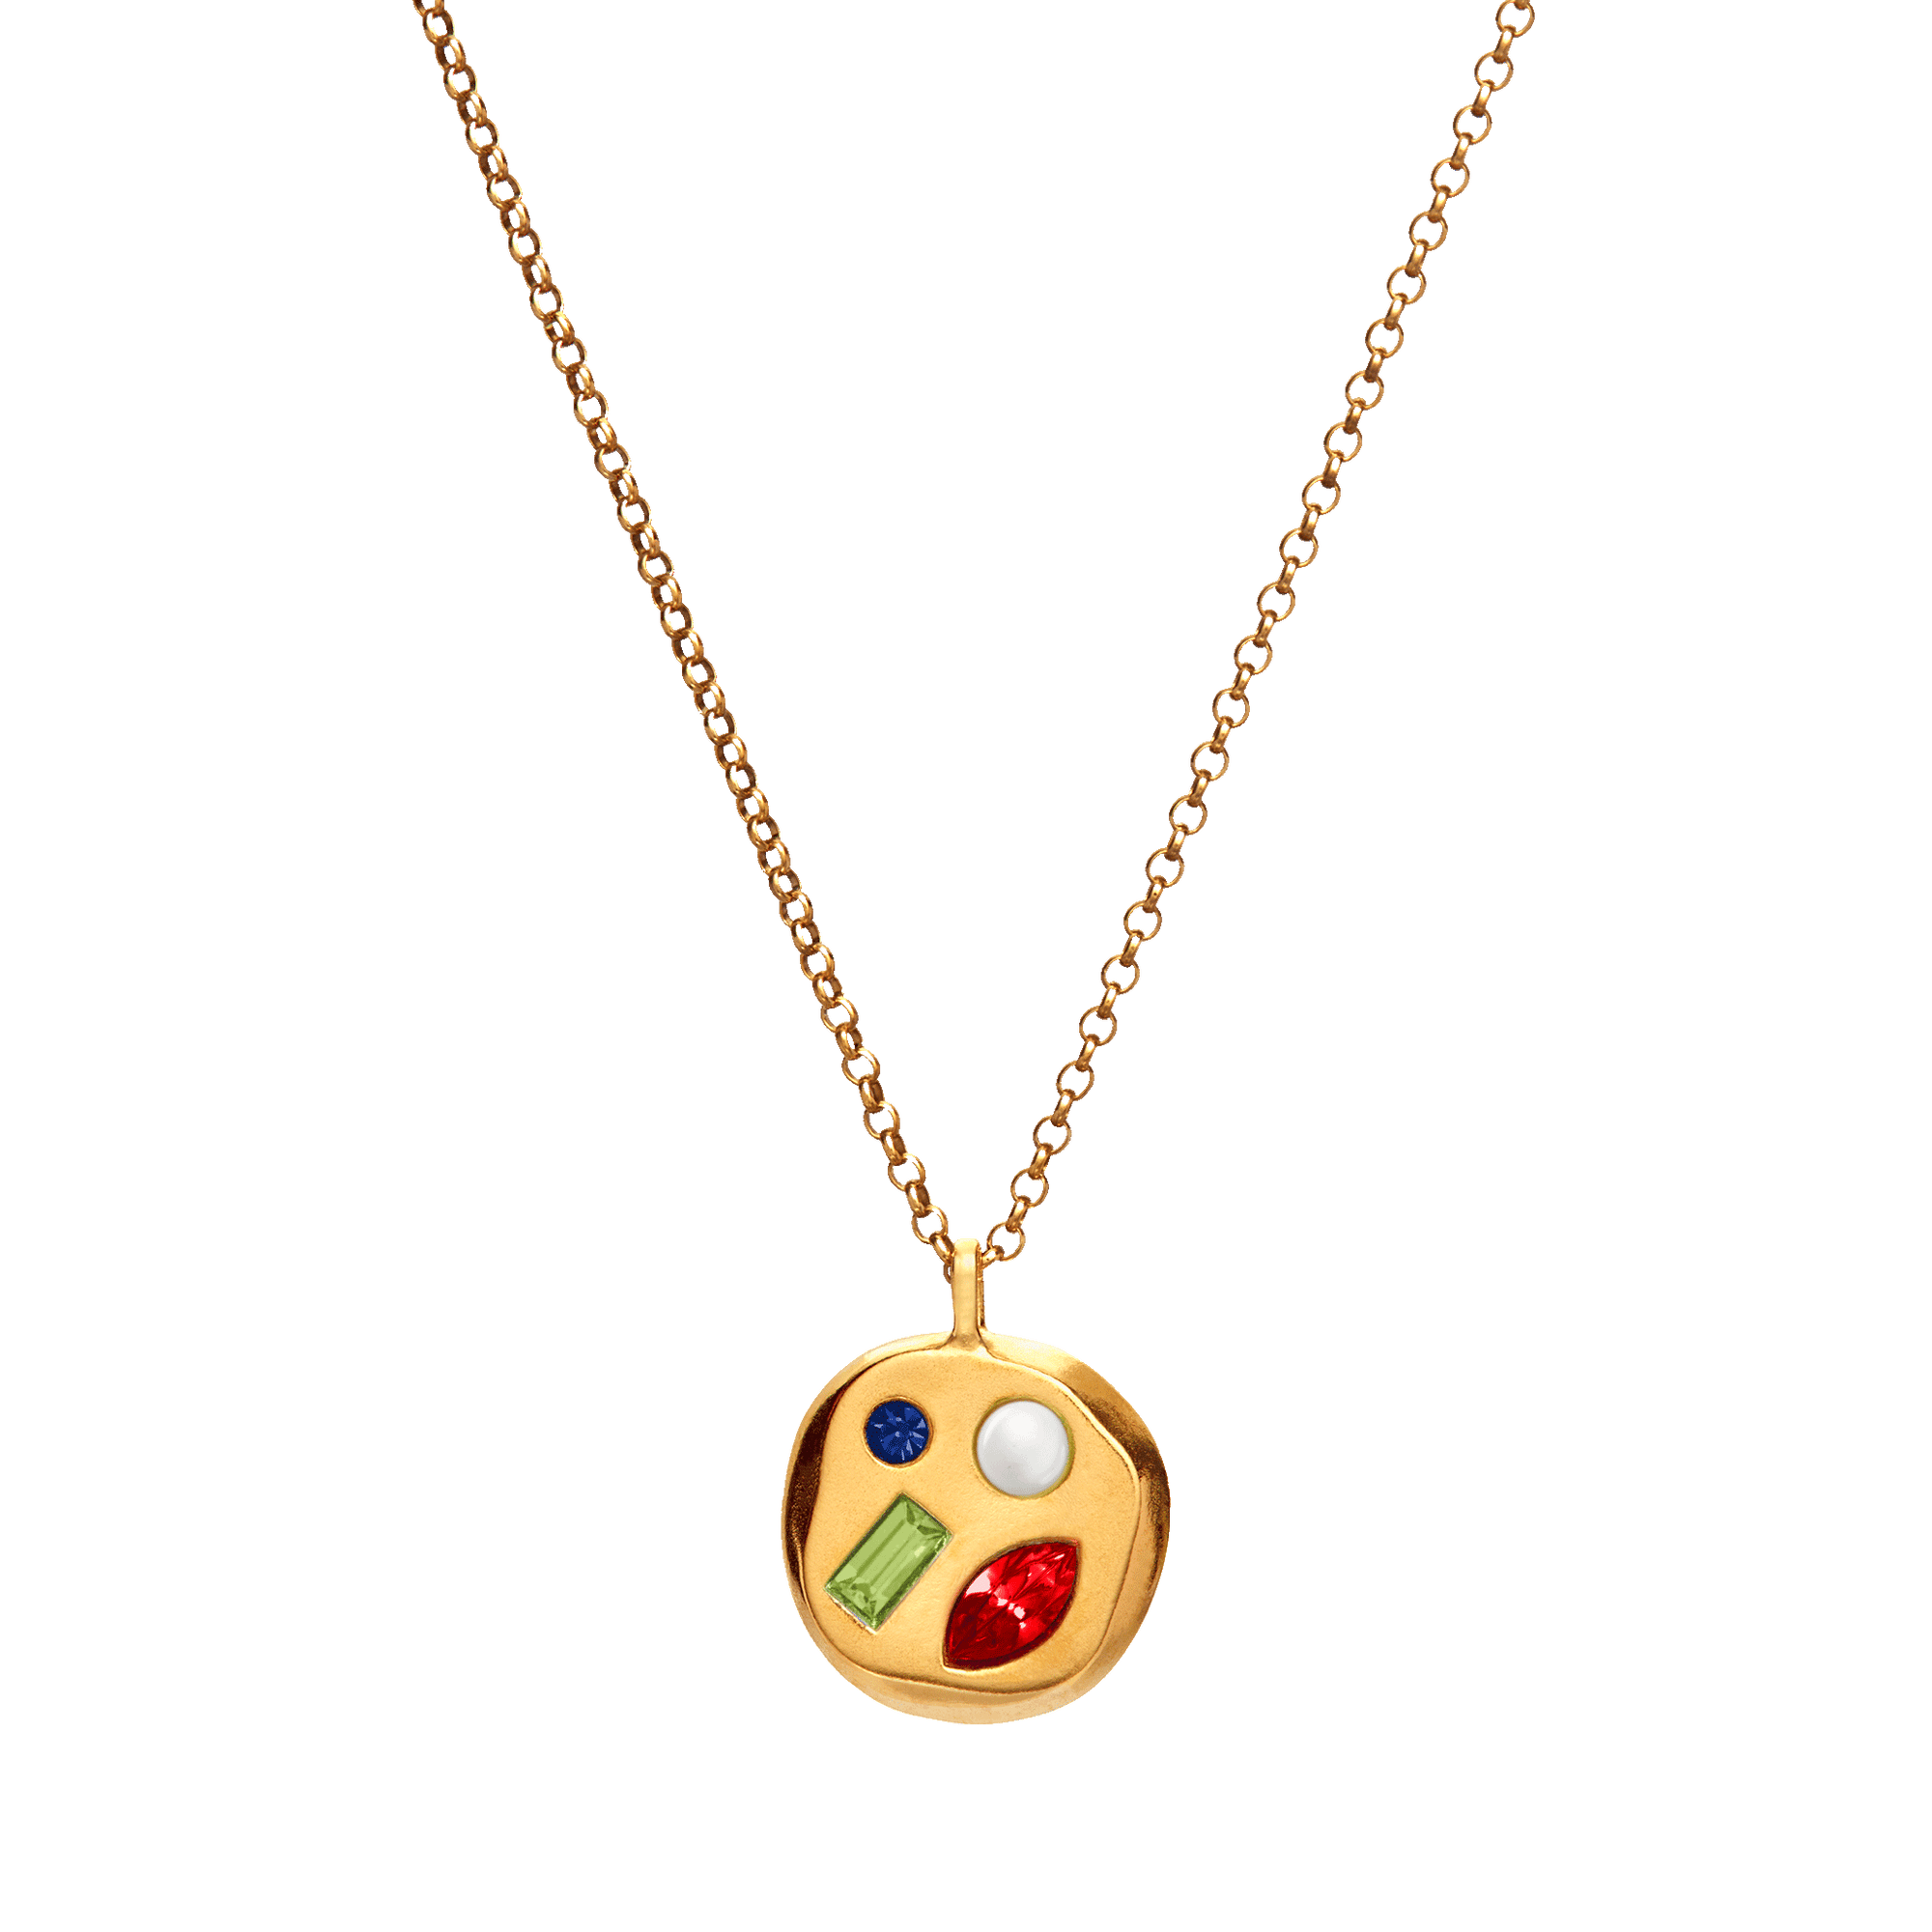 The January Second Pendant